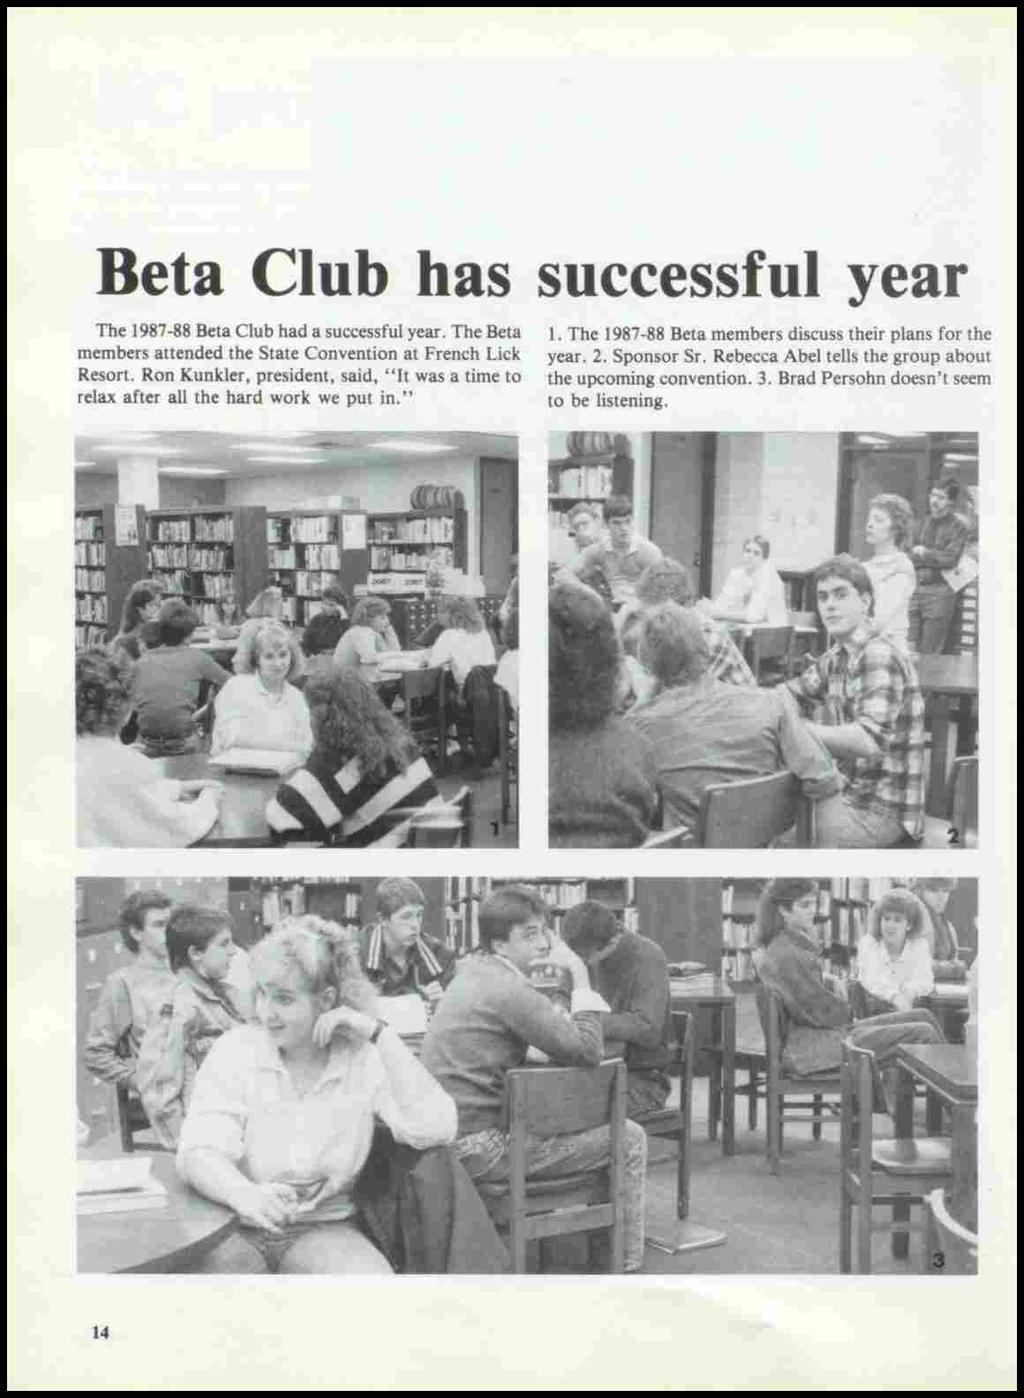 Beta Club has successful year The 1987-88 Beta Club had a successful year. The Beta members attended the State Convention at French Lick Resort.